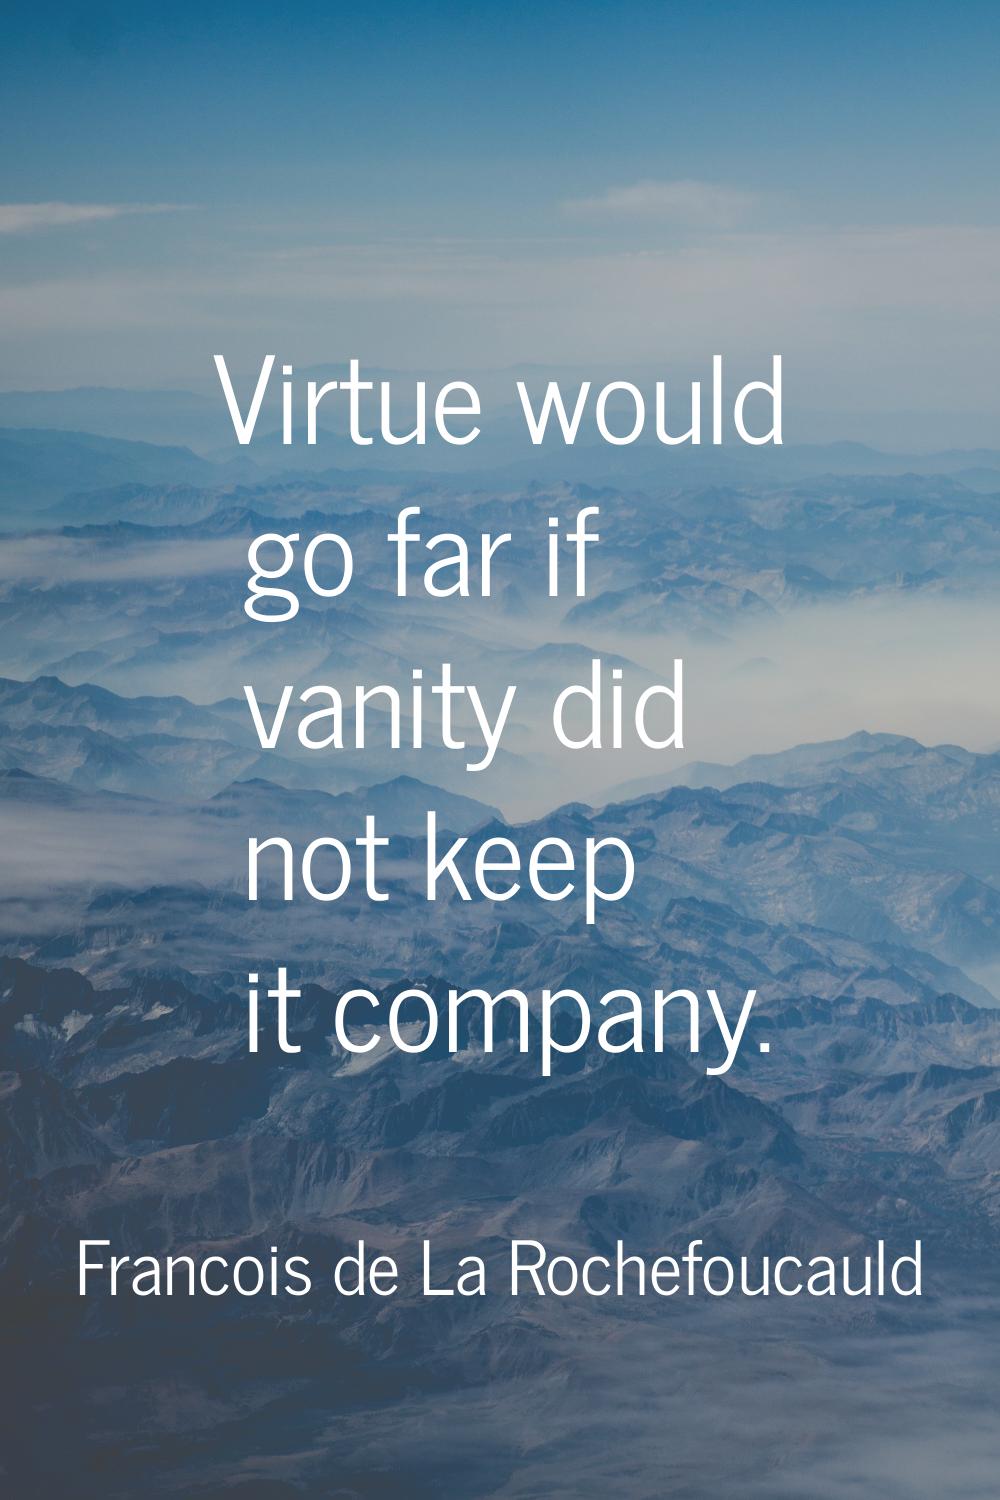 Virtue would go far if vanity did not keep it company.